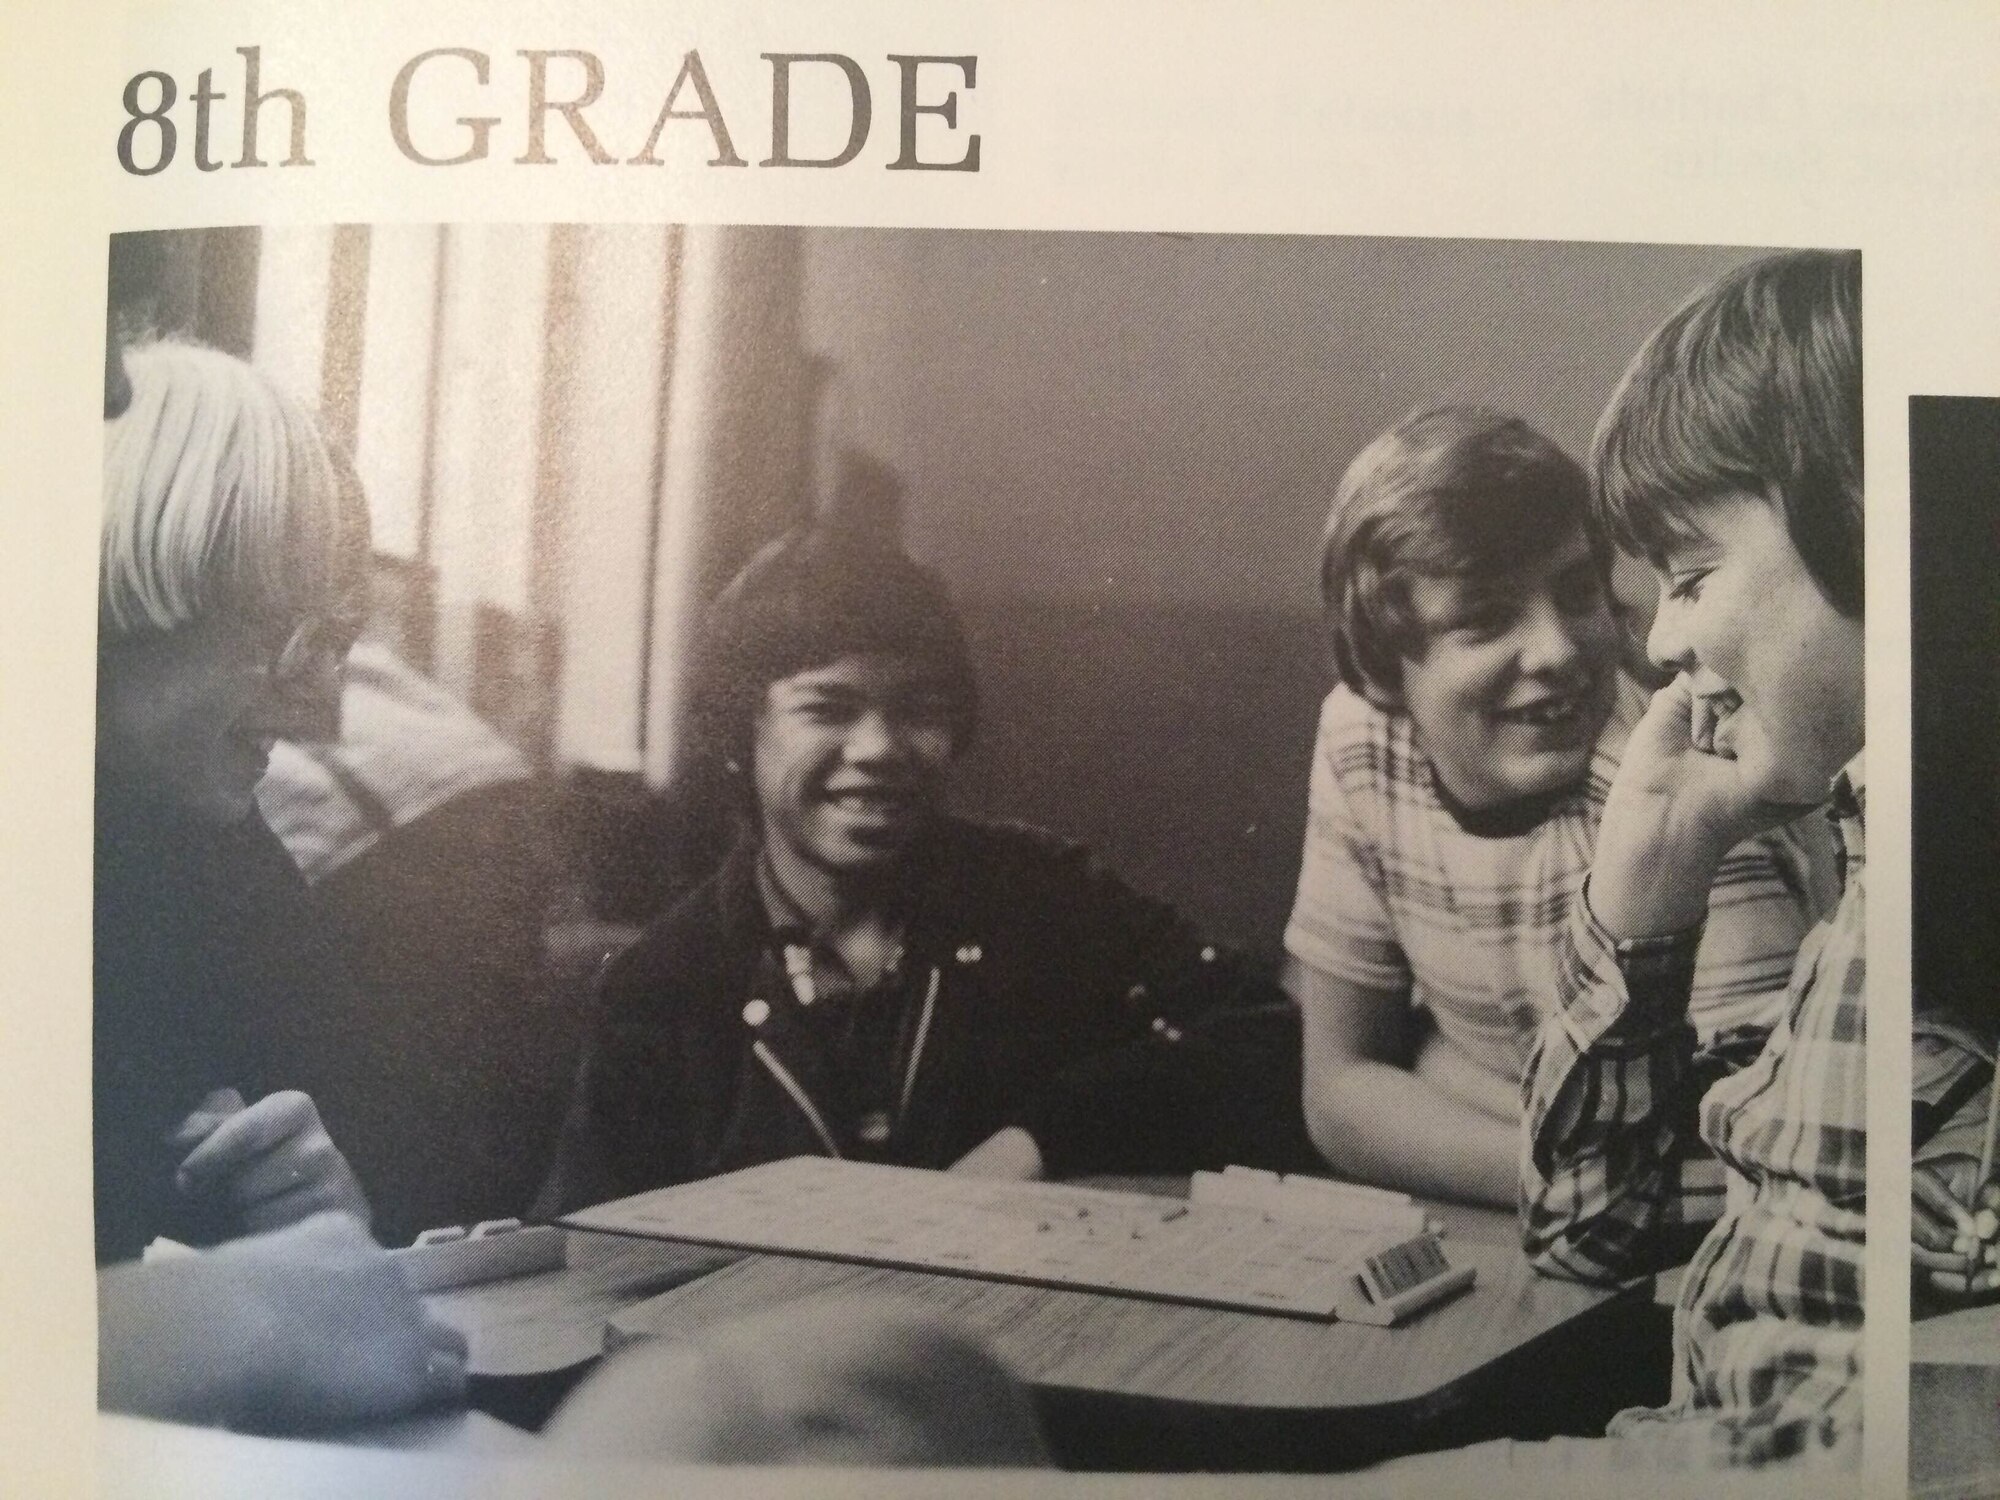 Photo of Brig. Gen. Patrick Higby, 81st Training Wing commander, playing with childhood friends in eighth grade. (Courtesy photo)